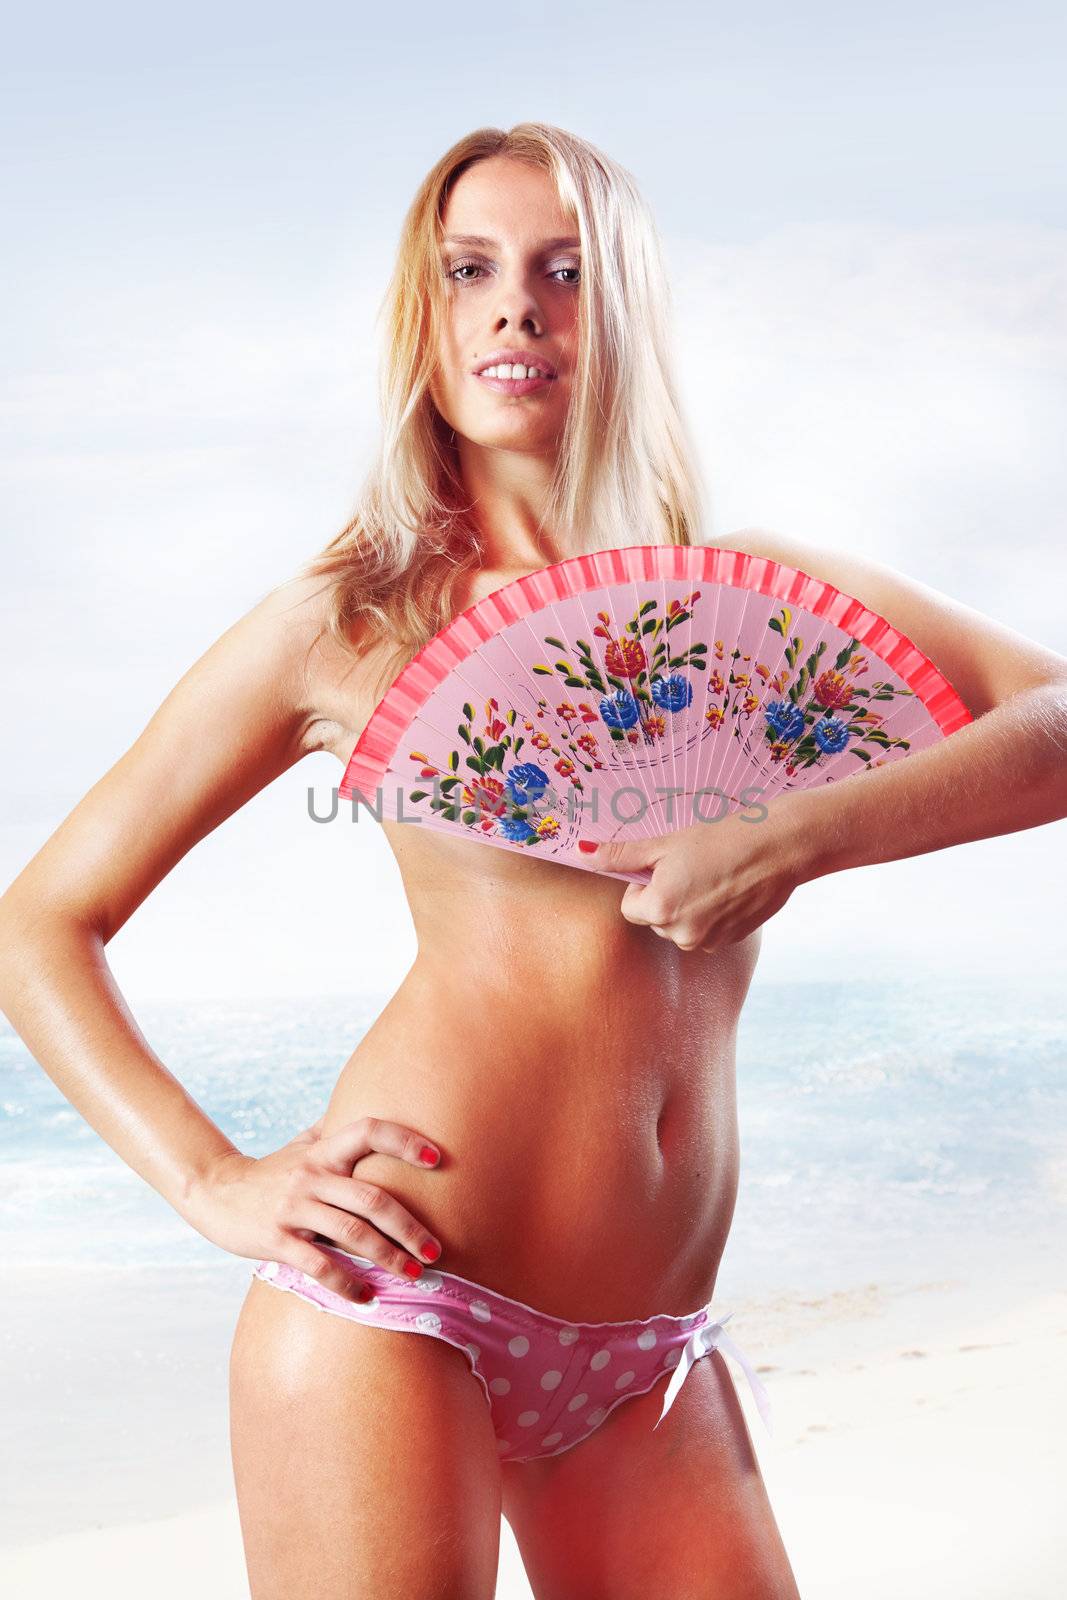 woman holding fan on beach by ssuaphoto